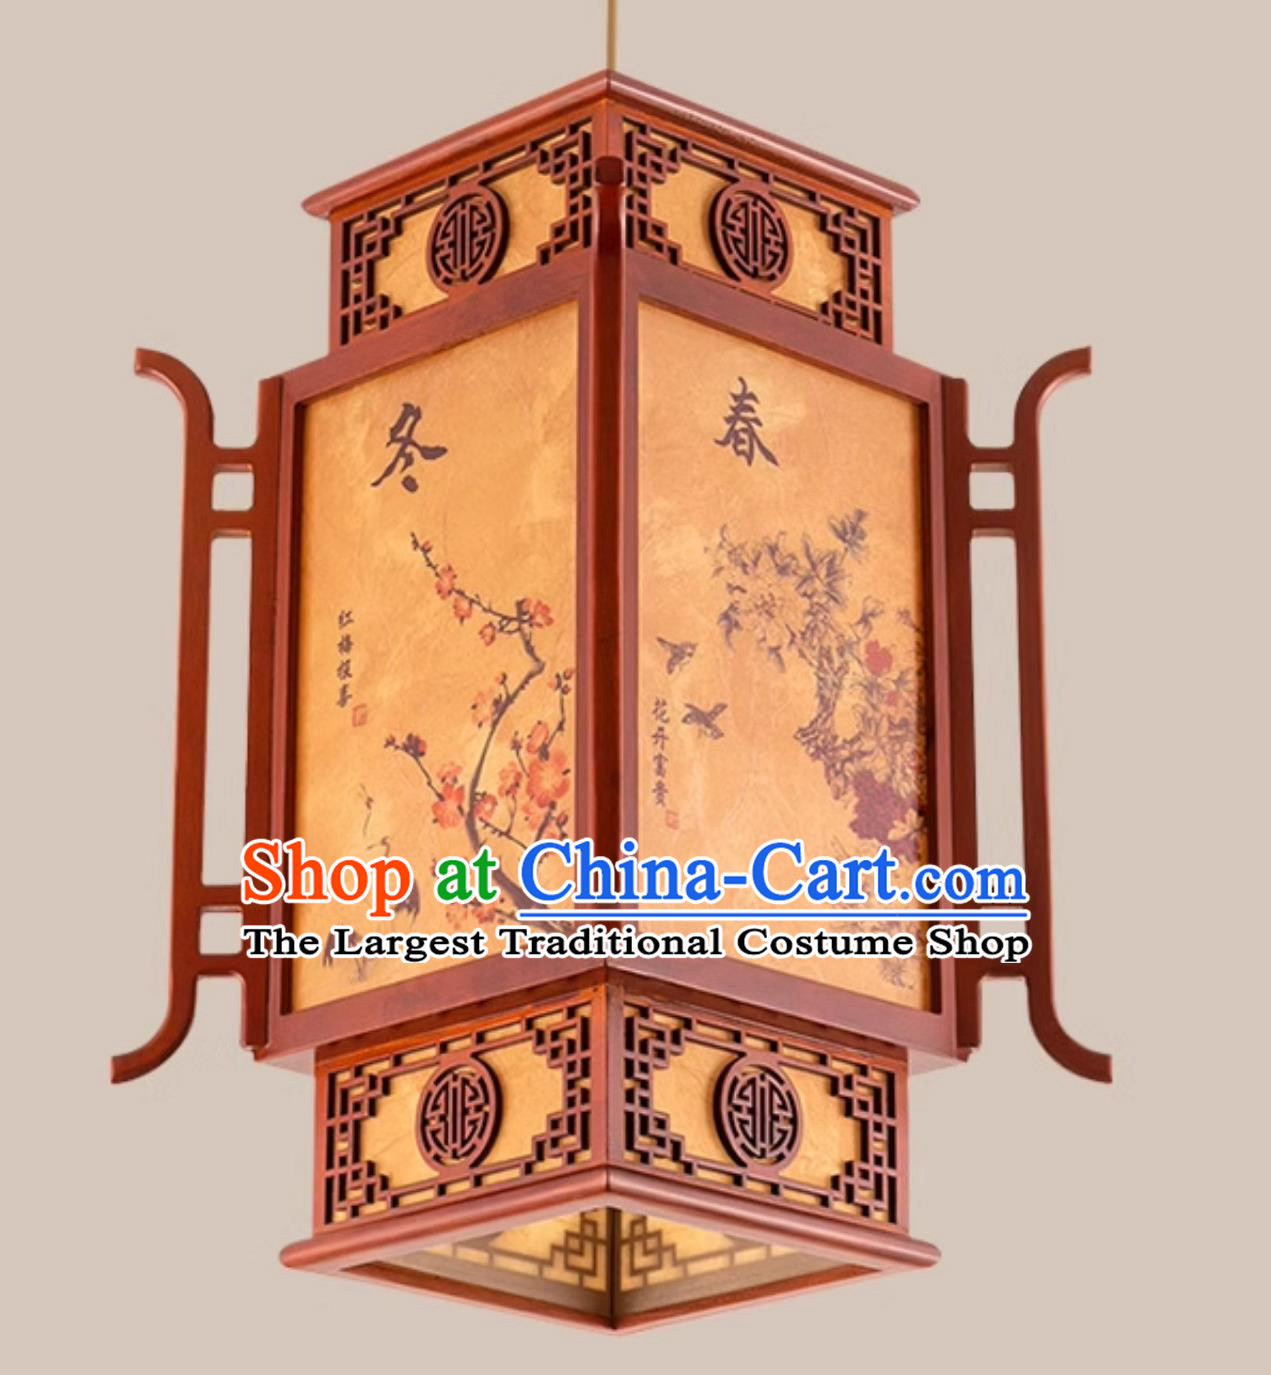 21 Inches High Chinese Antique Small Chandelier Solid Wood Lantern For Courtyard Teahouse Aisle